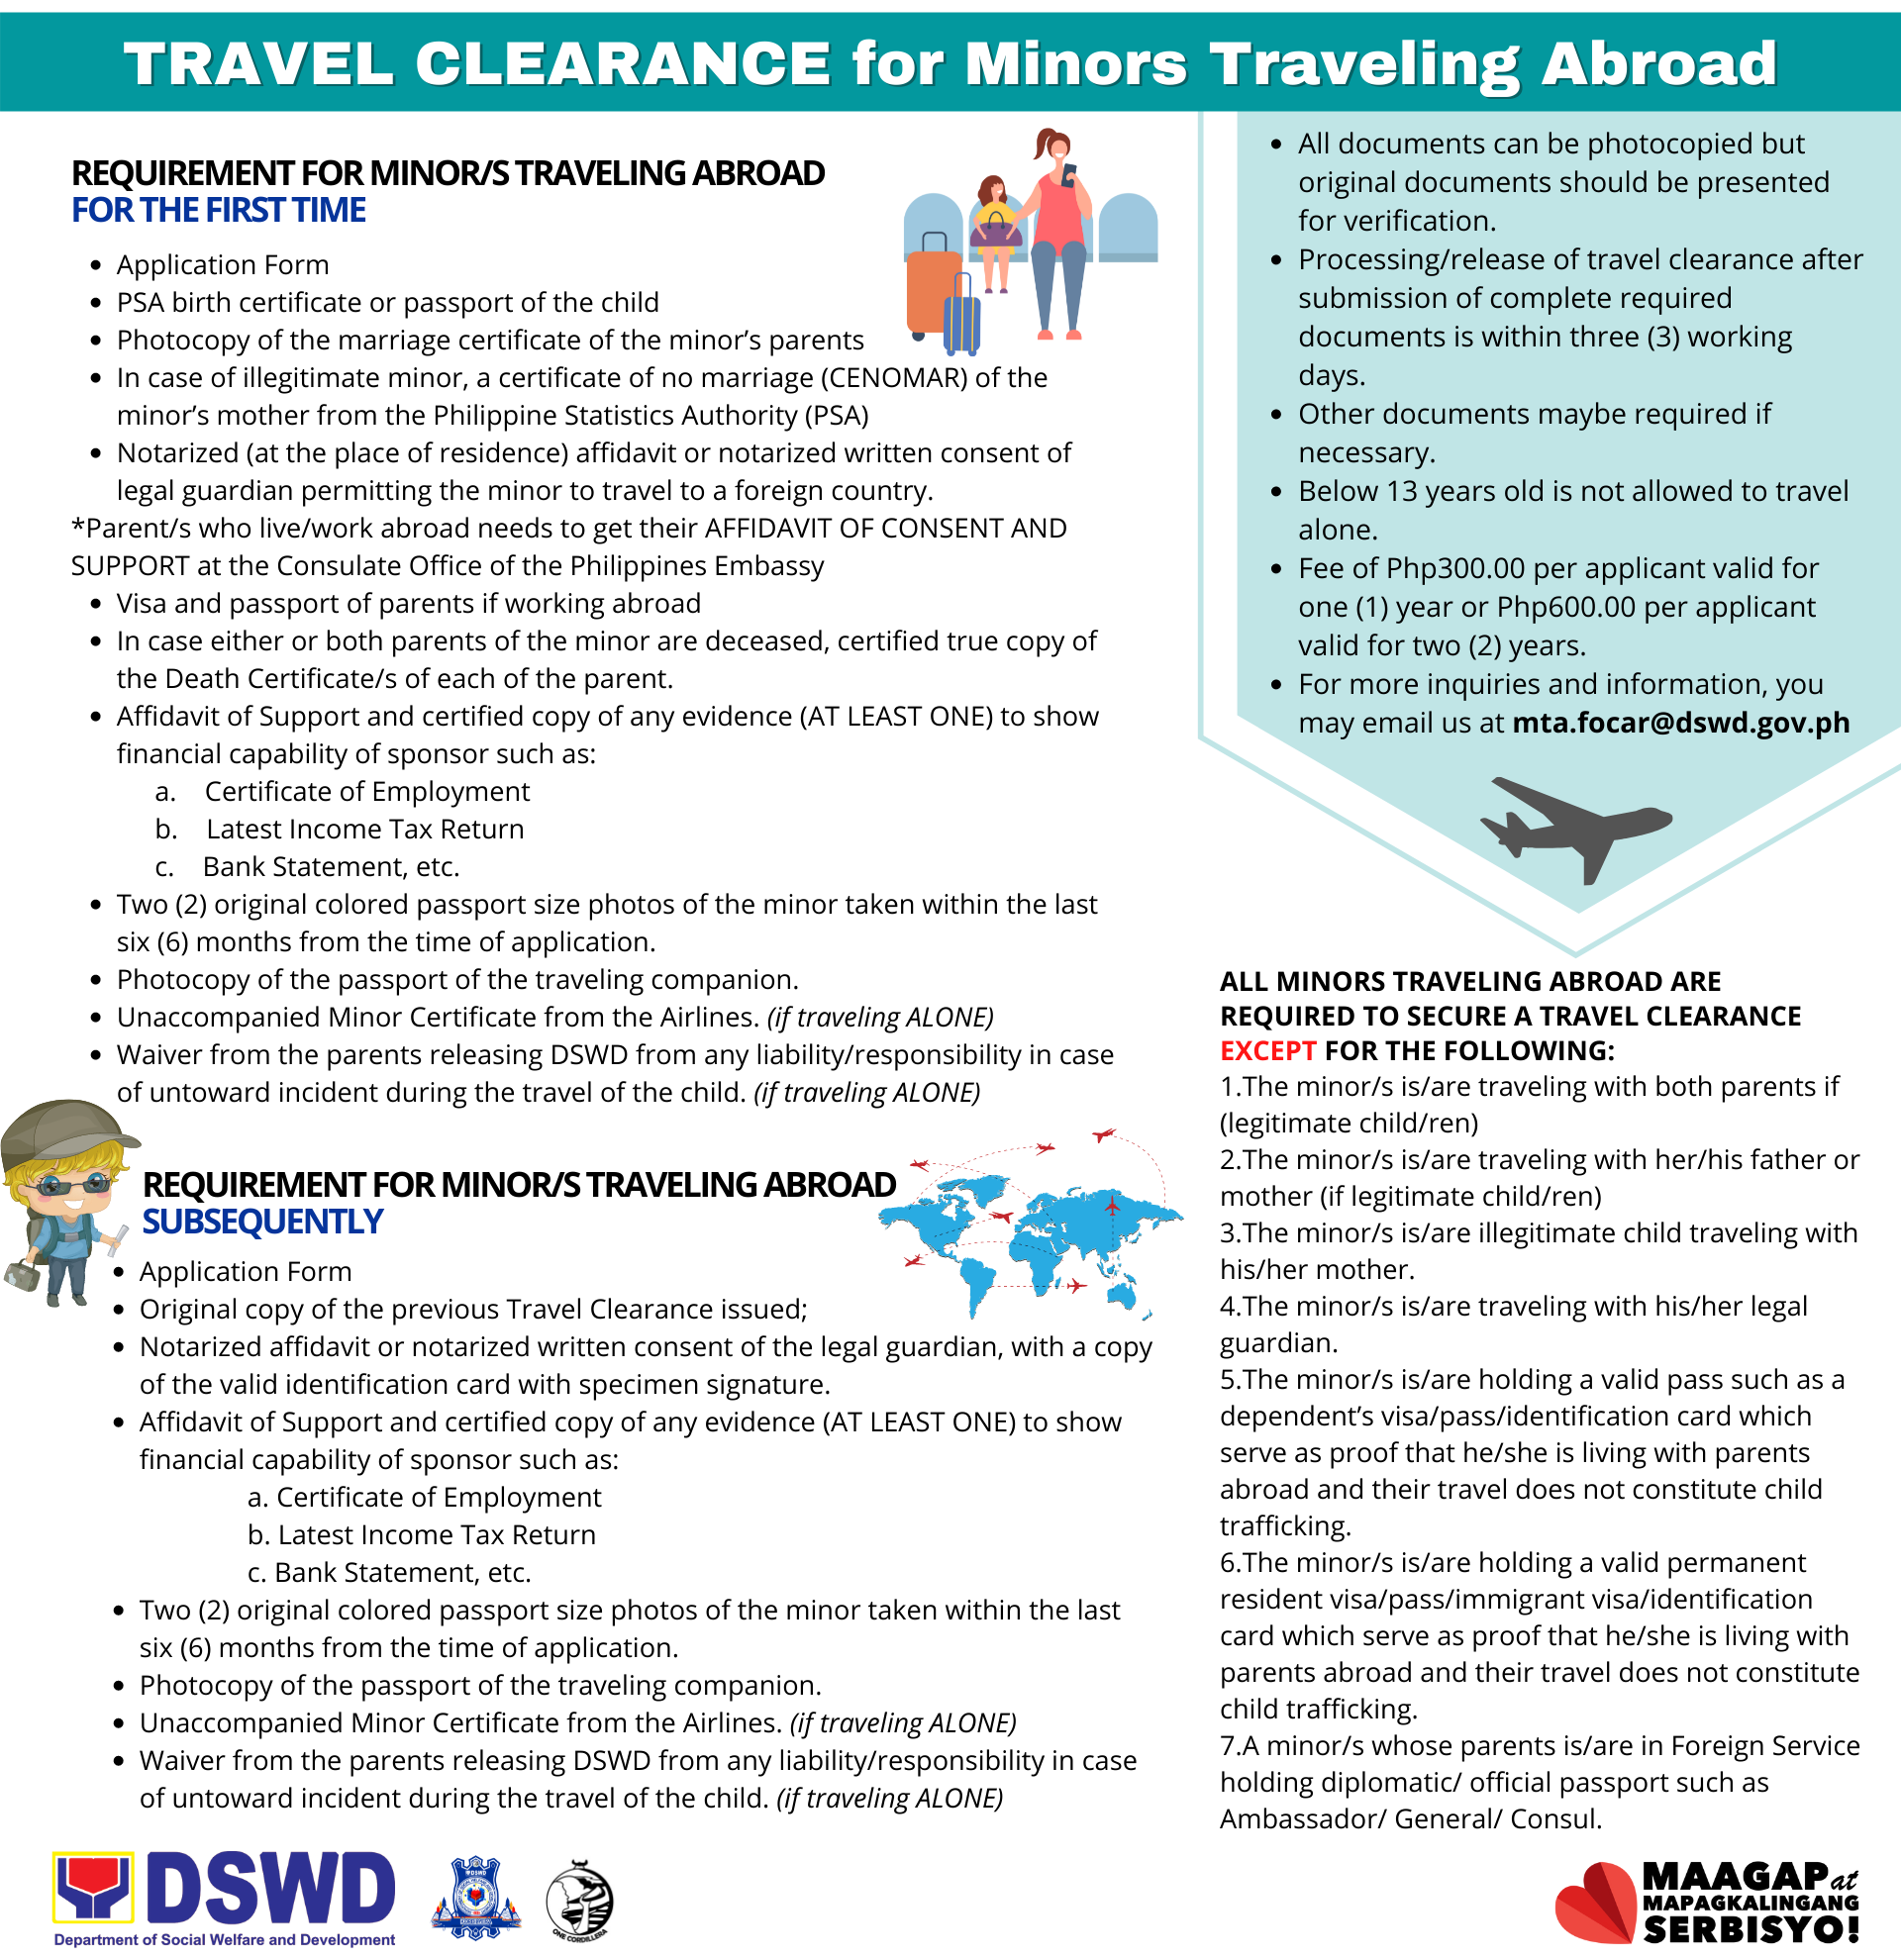 dswd travel clearance for minors 2023